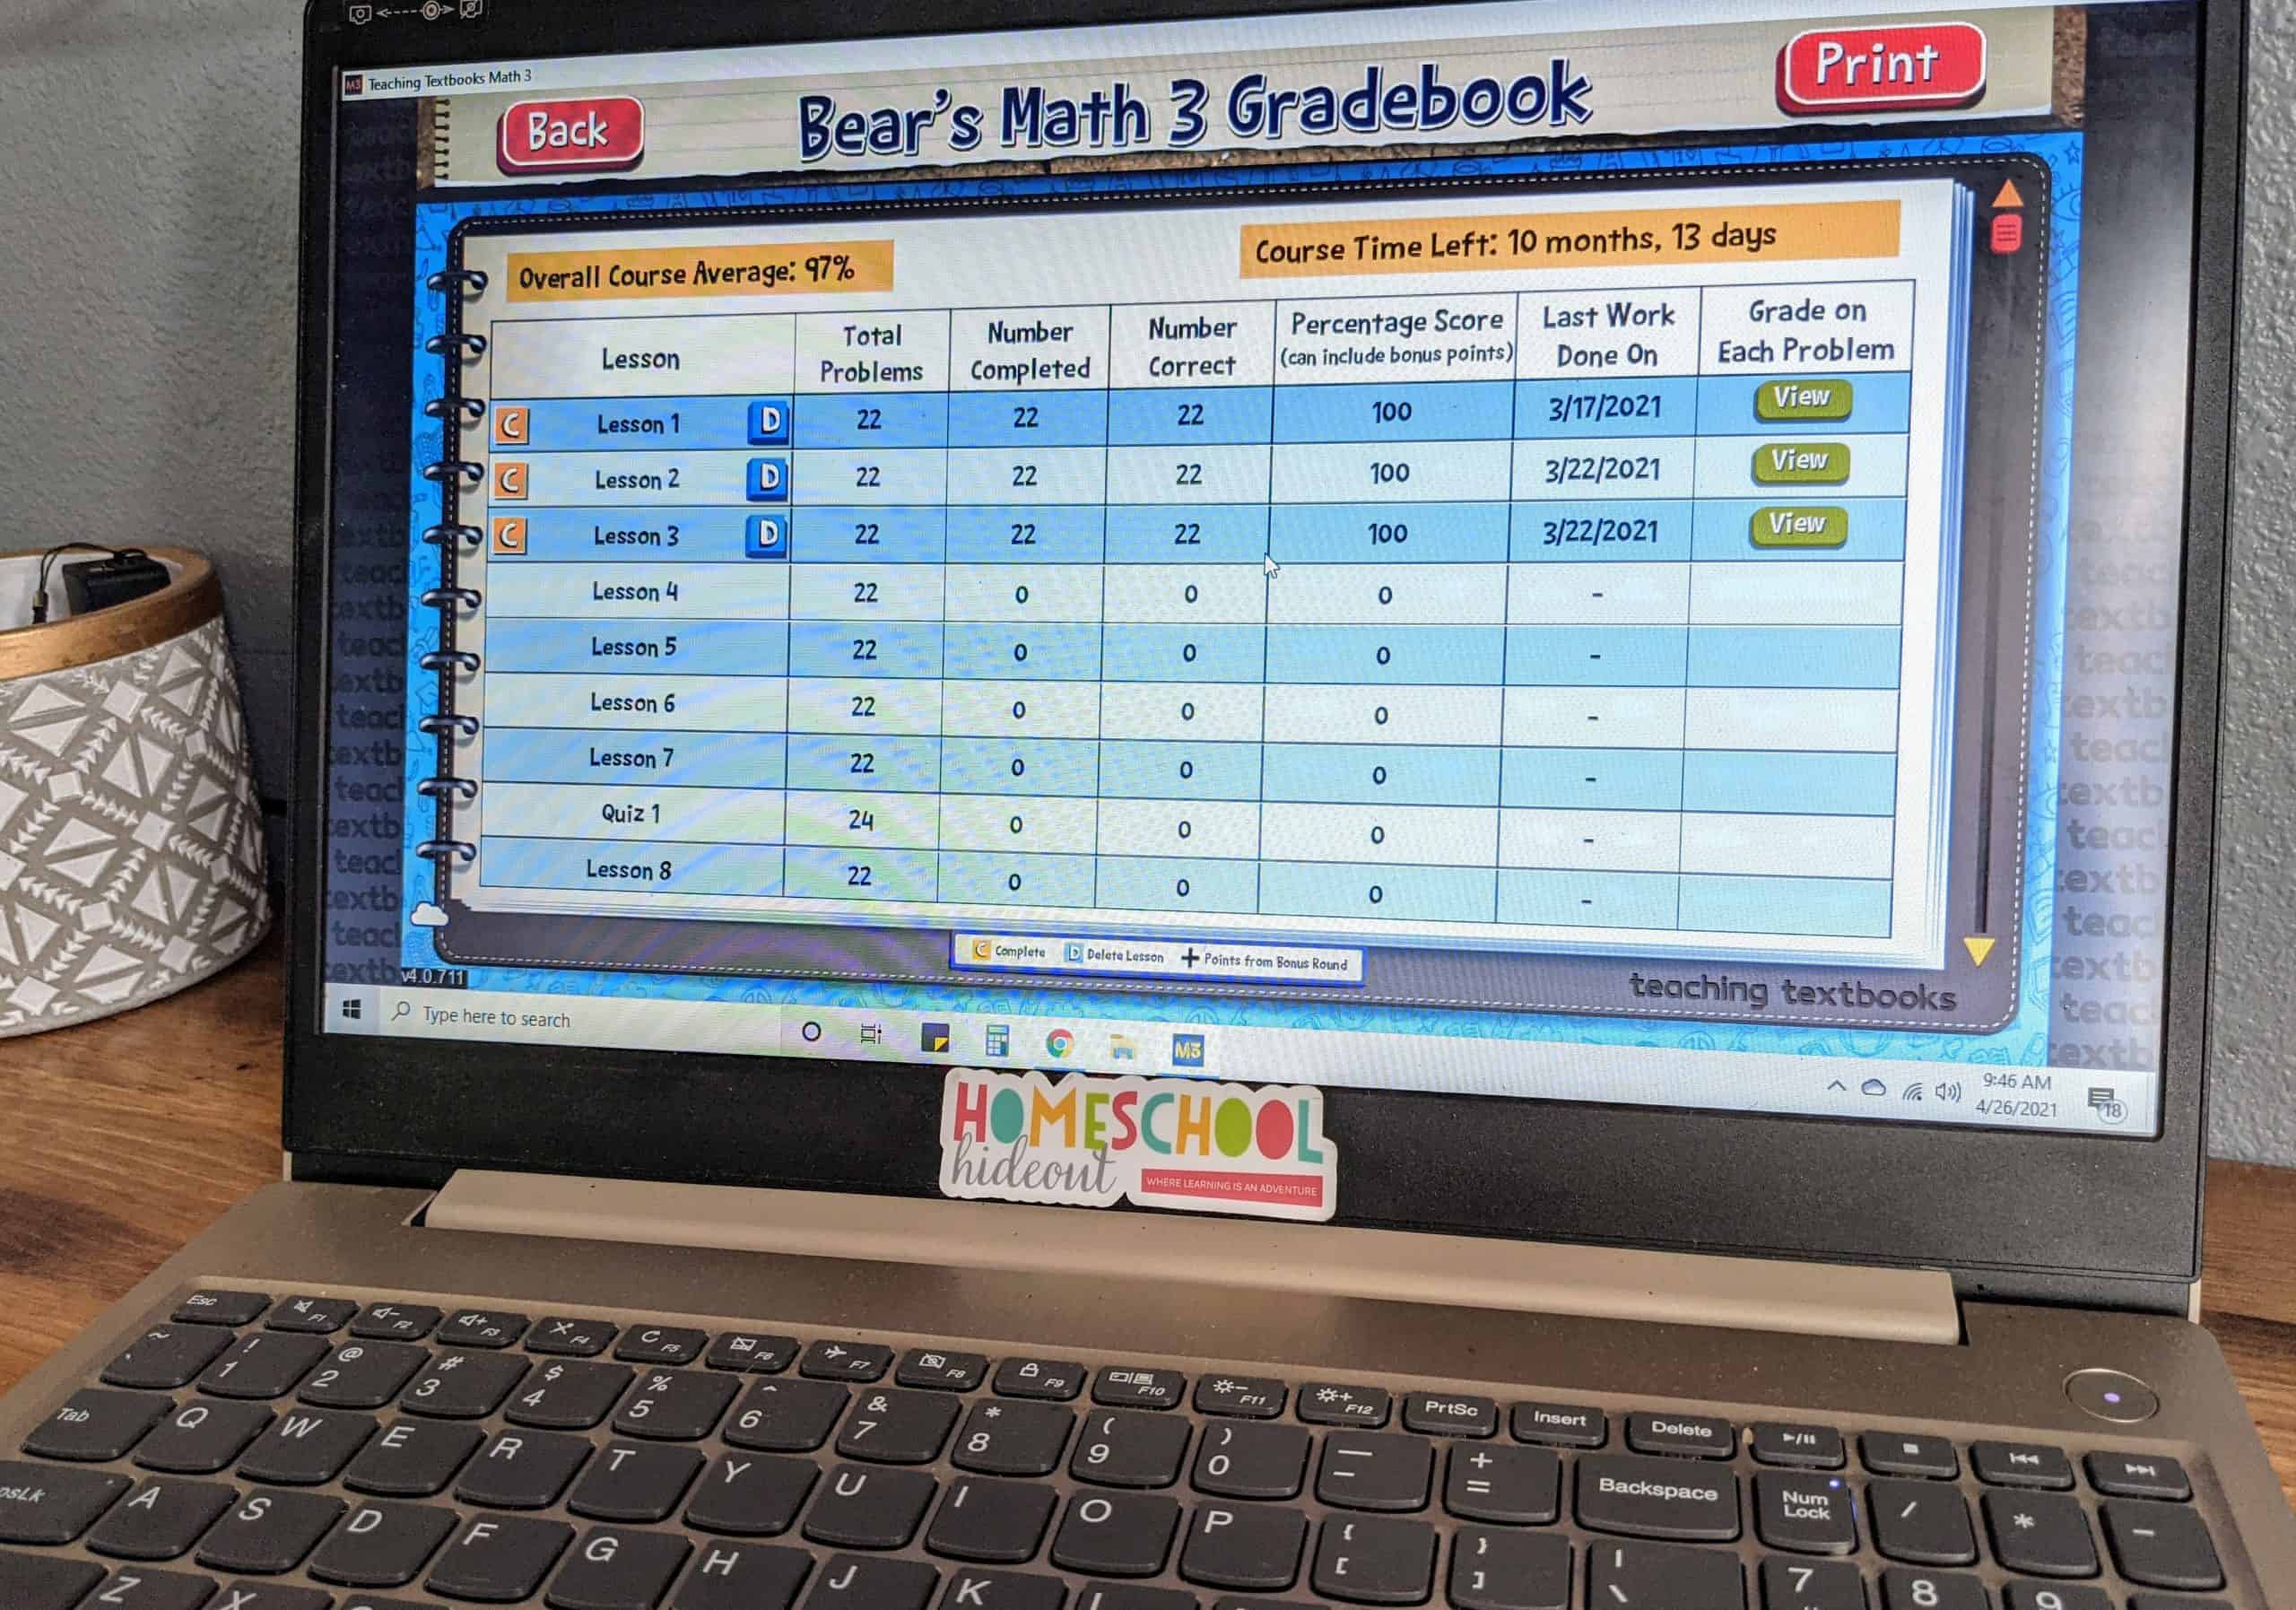 Teaching Textbooks 4.0 is more than I ever expected! Holy cow! It teaches, grades AND records our homeschool math, all while making the kids ENJOY math!